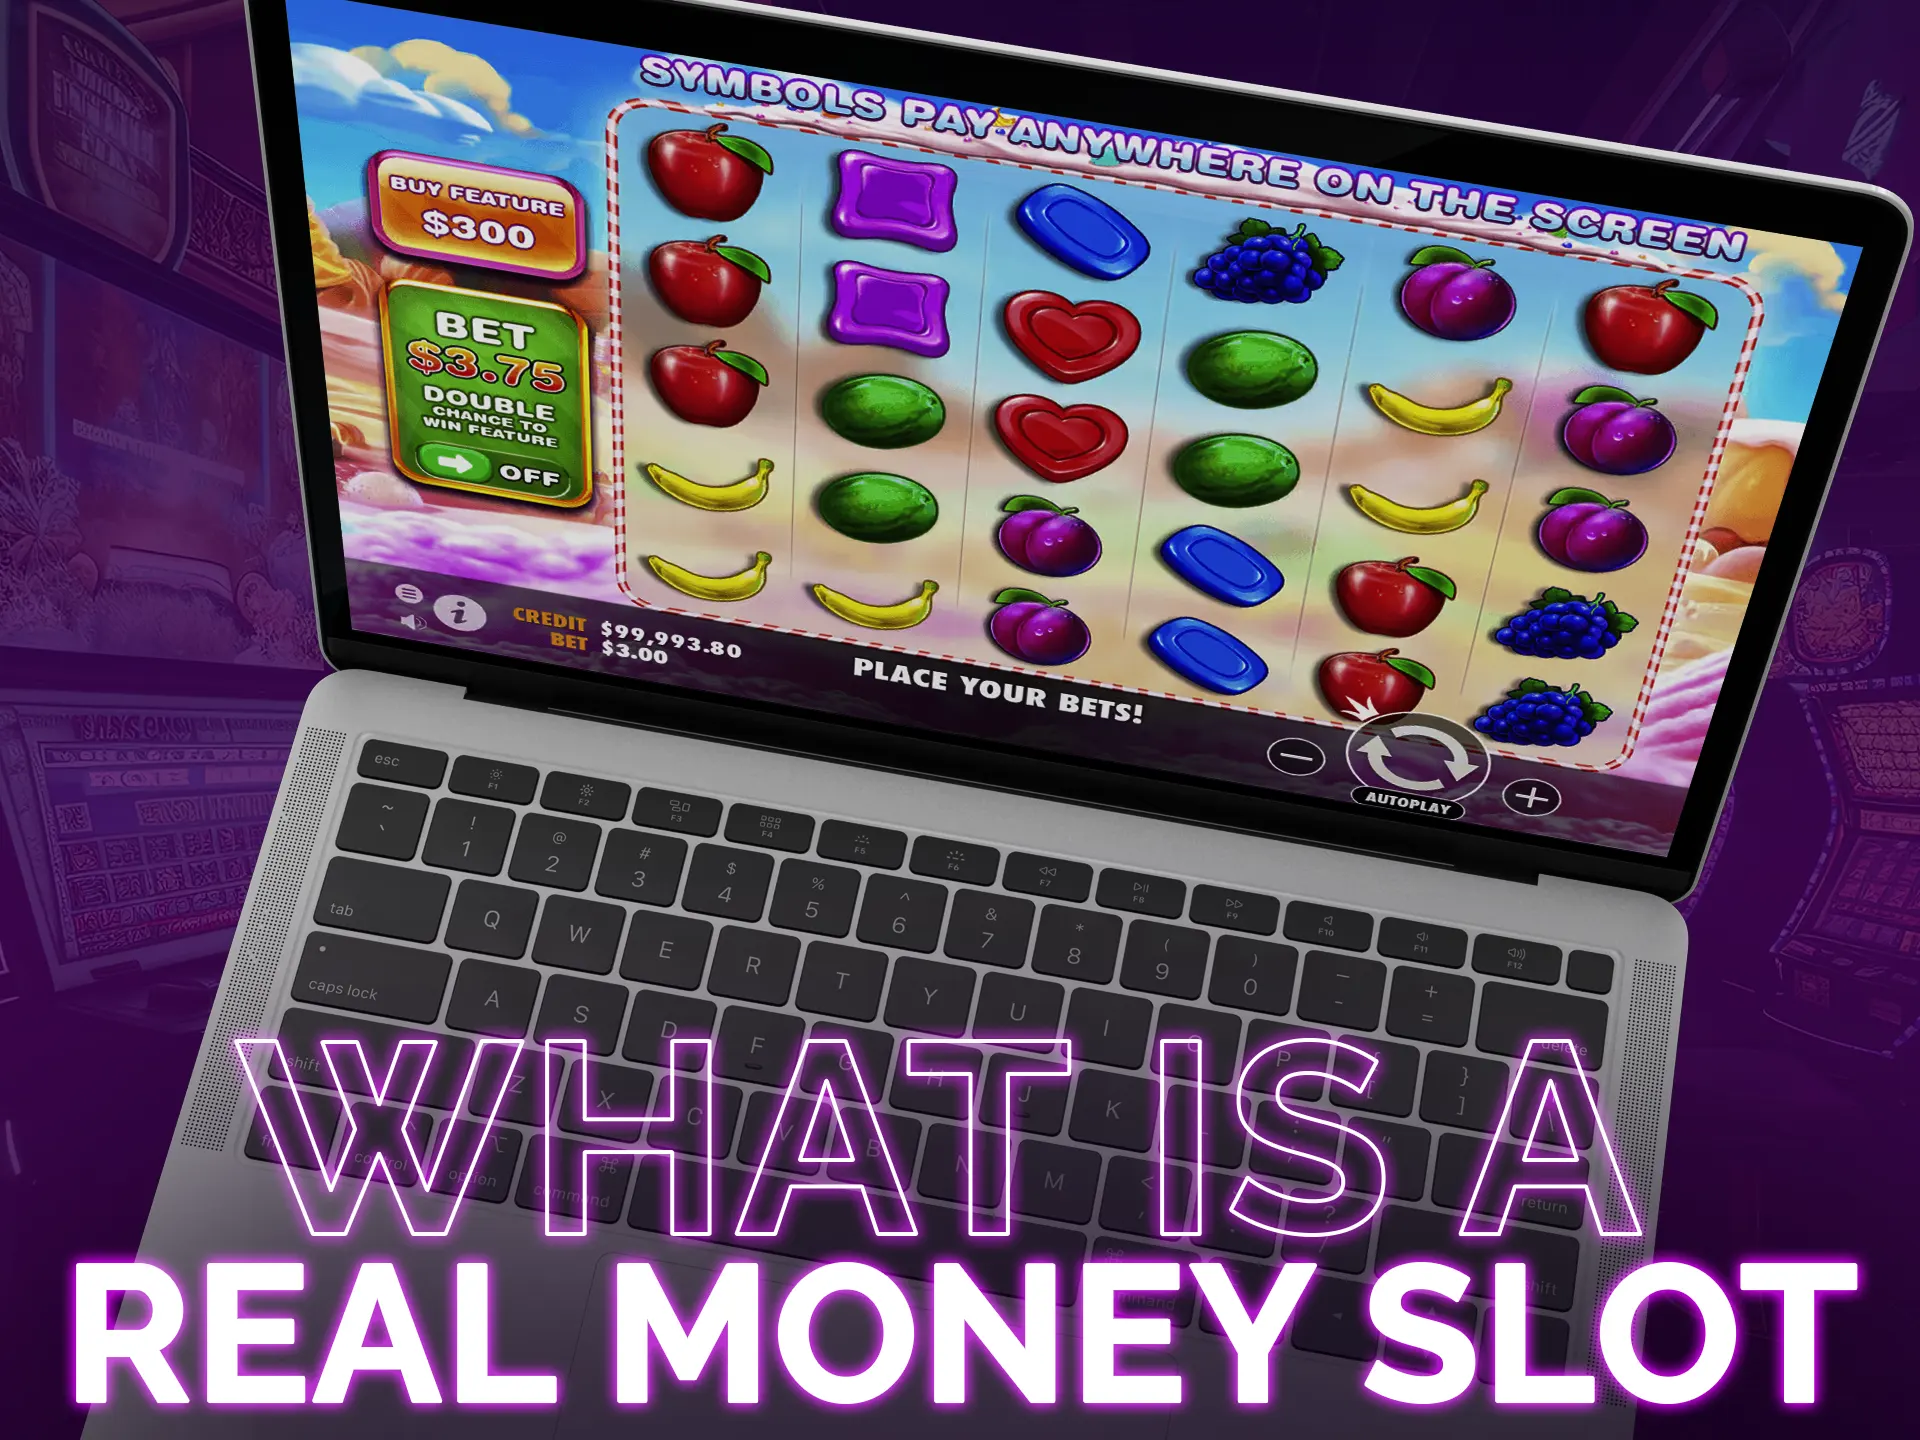 Find out all the features of Real Money Slot.